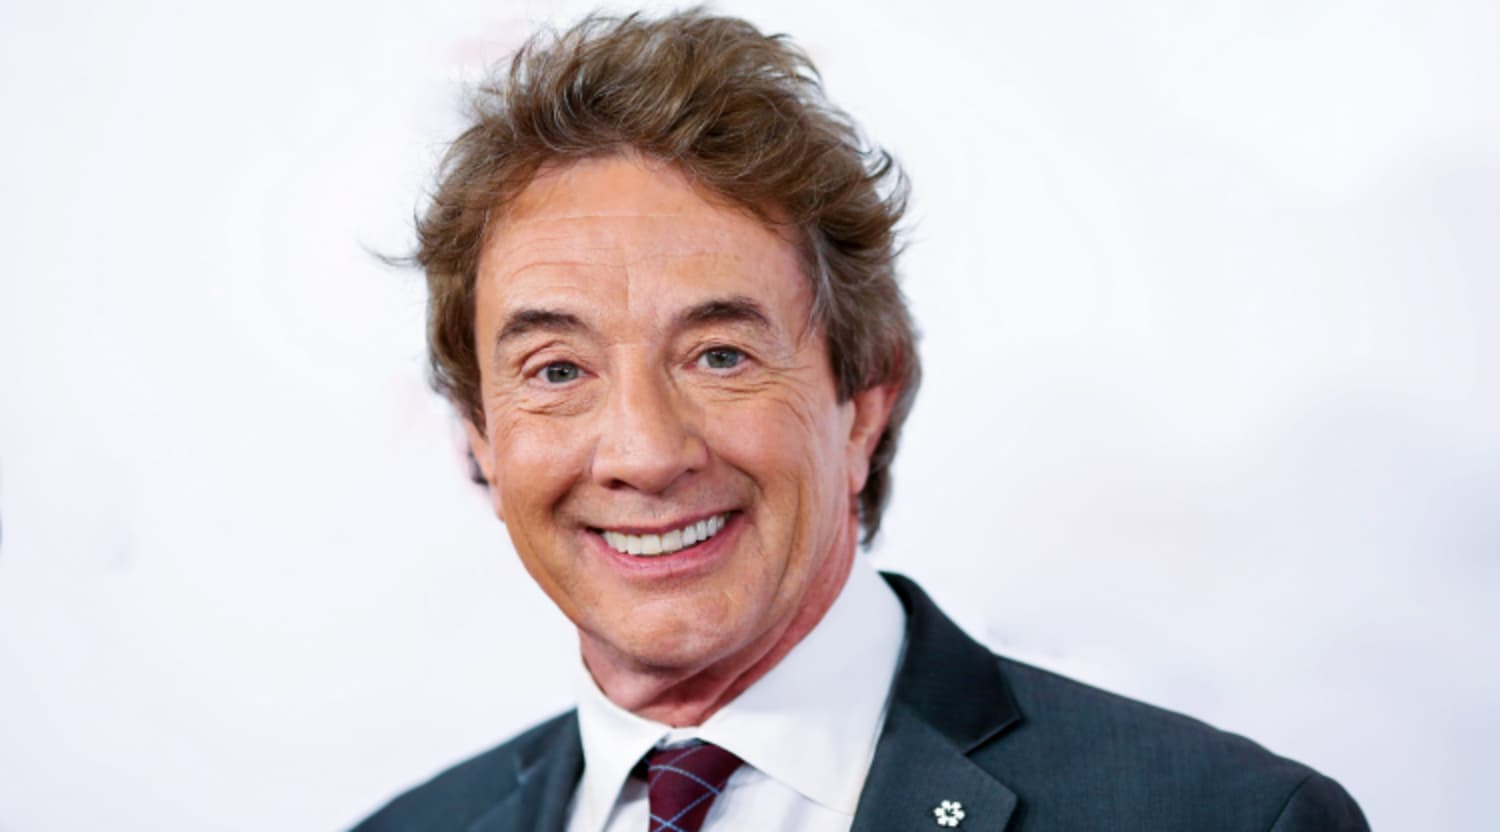 Martin Short Wiki, Bio, Age, Net Worth, and Other Facts